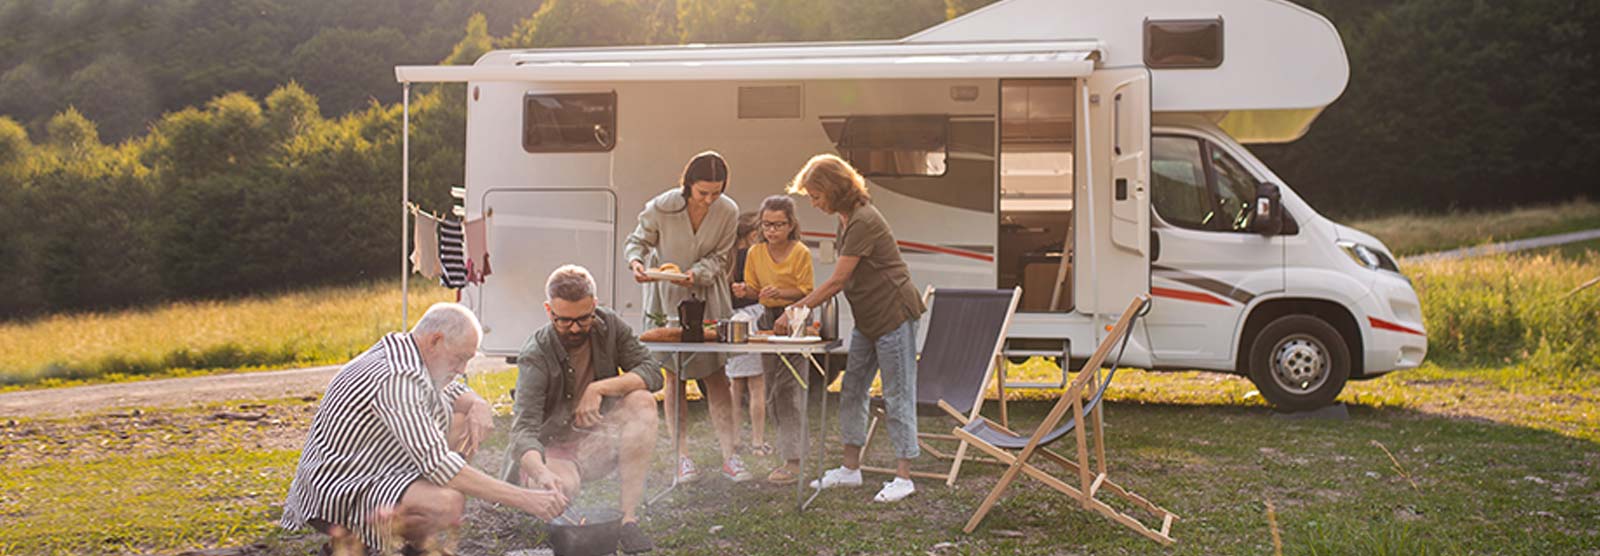 Multigenerational family camping in an RV